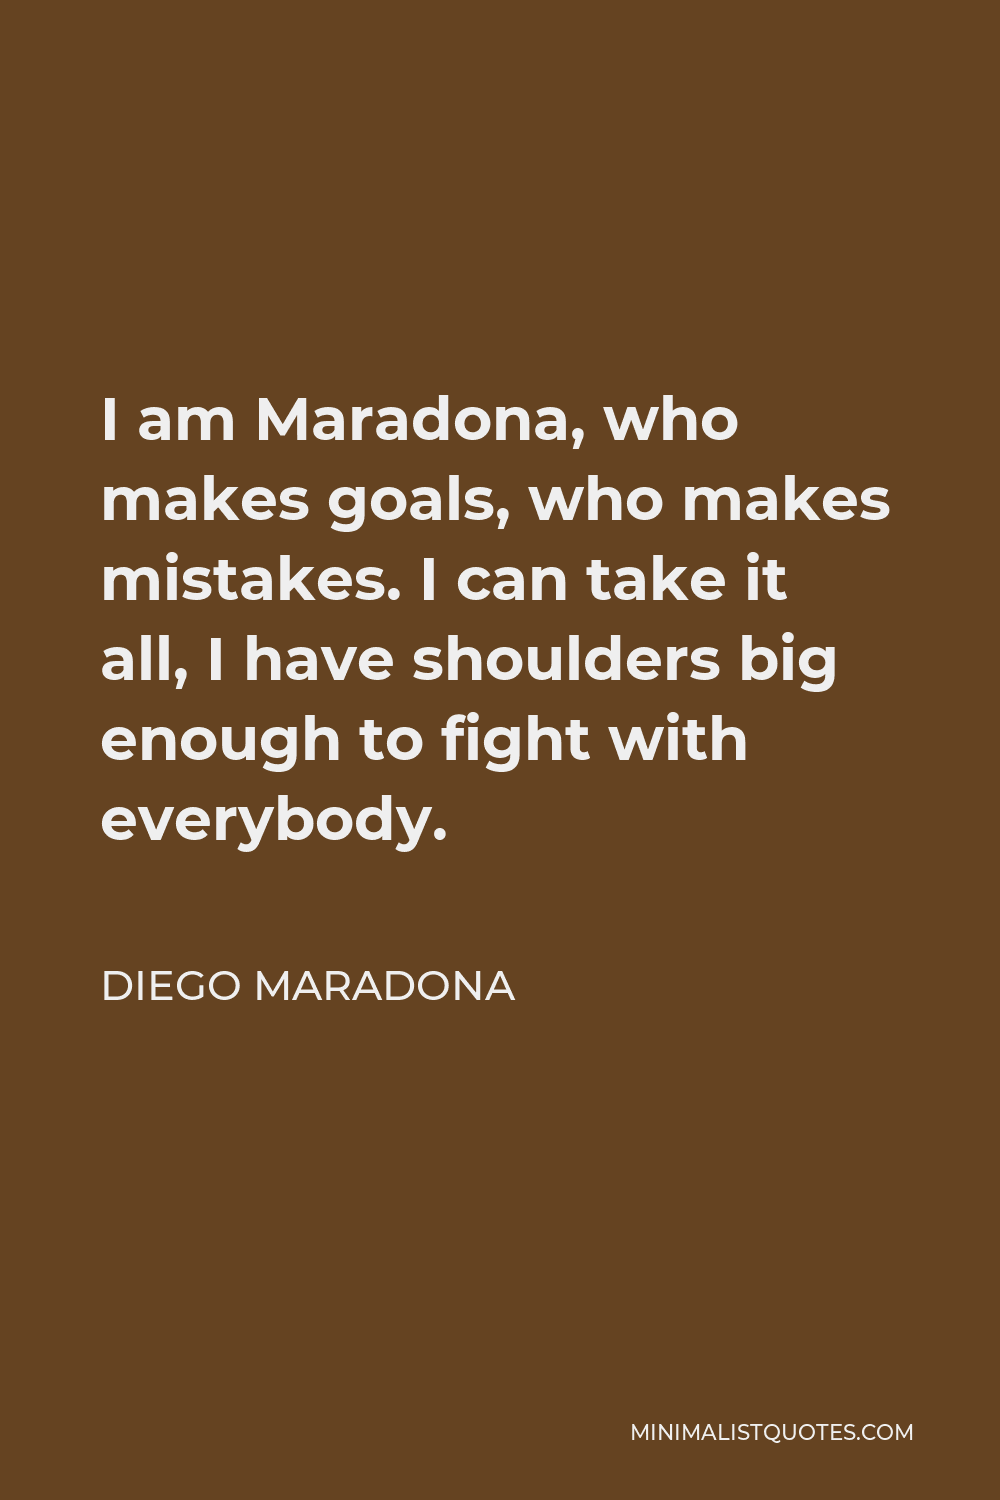 Diego Maradona Quote - I am Maradona, who makes goals, who makes mistakes. I can take it all, I have shoulders big enough to fight with everybody.